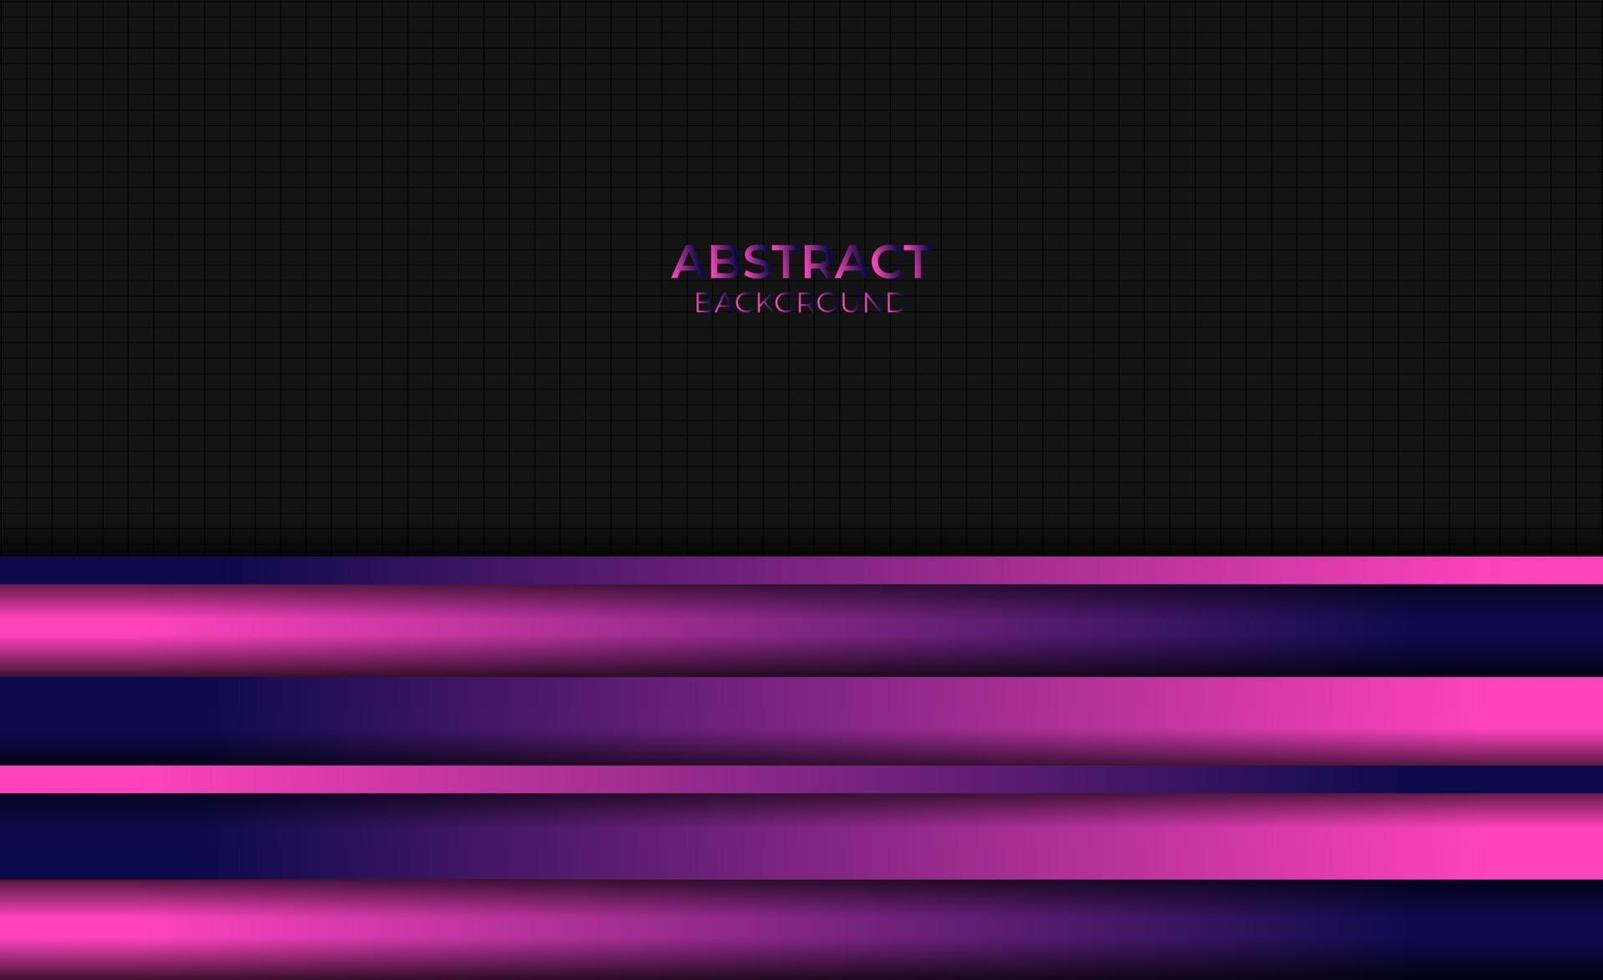 Abstract Style Gradient Purple Pink Background Design vector